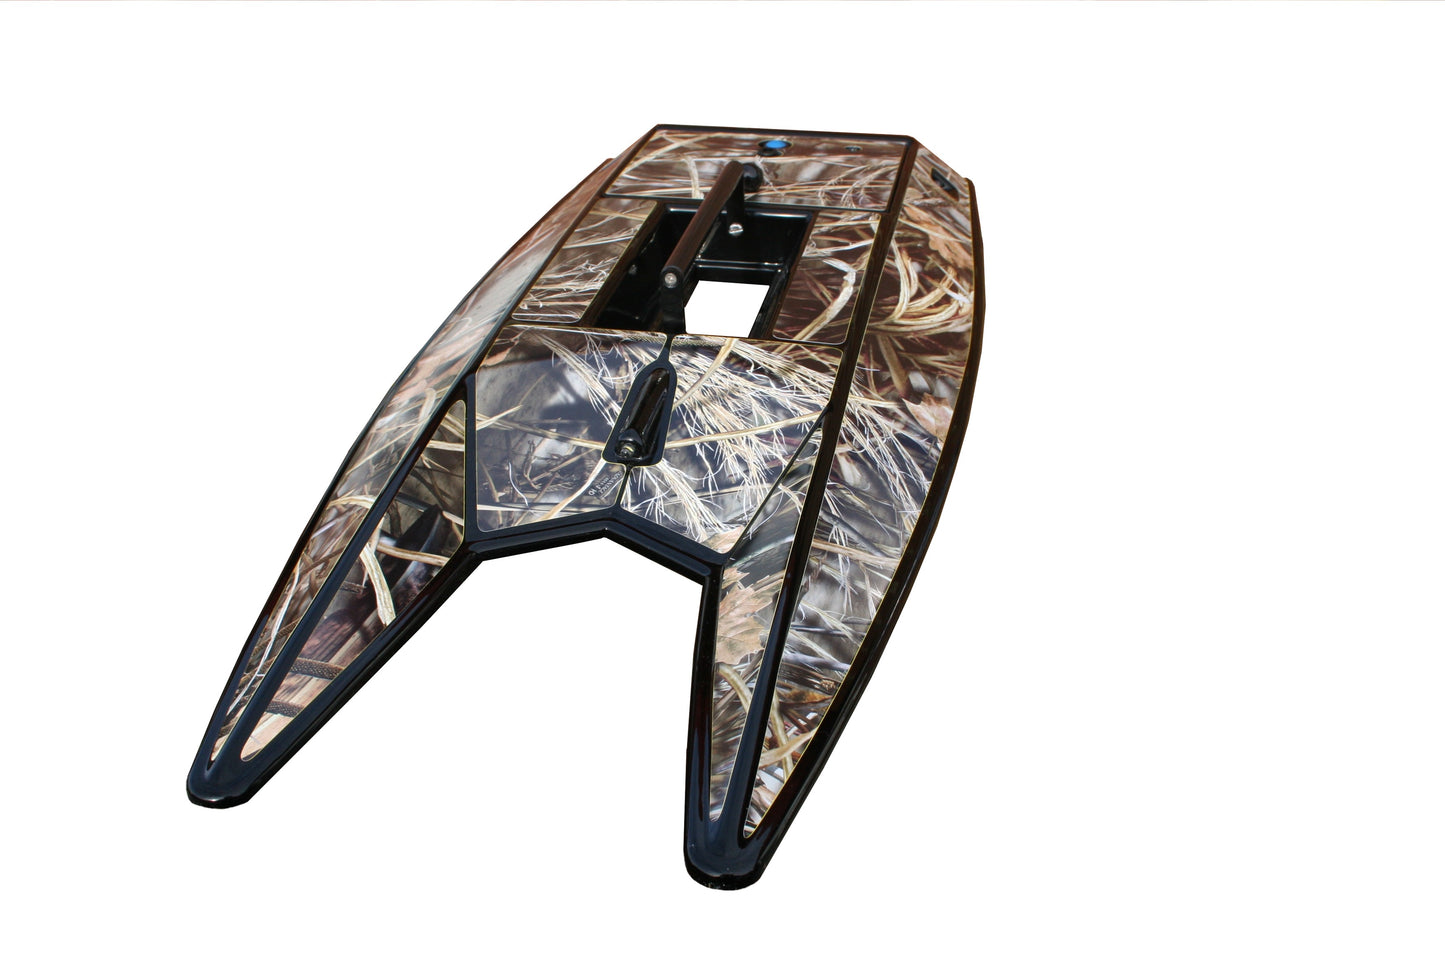 Realtree Camouflage Decal Sets